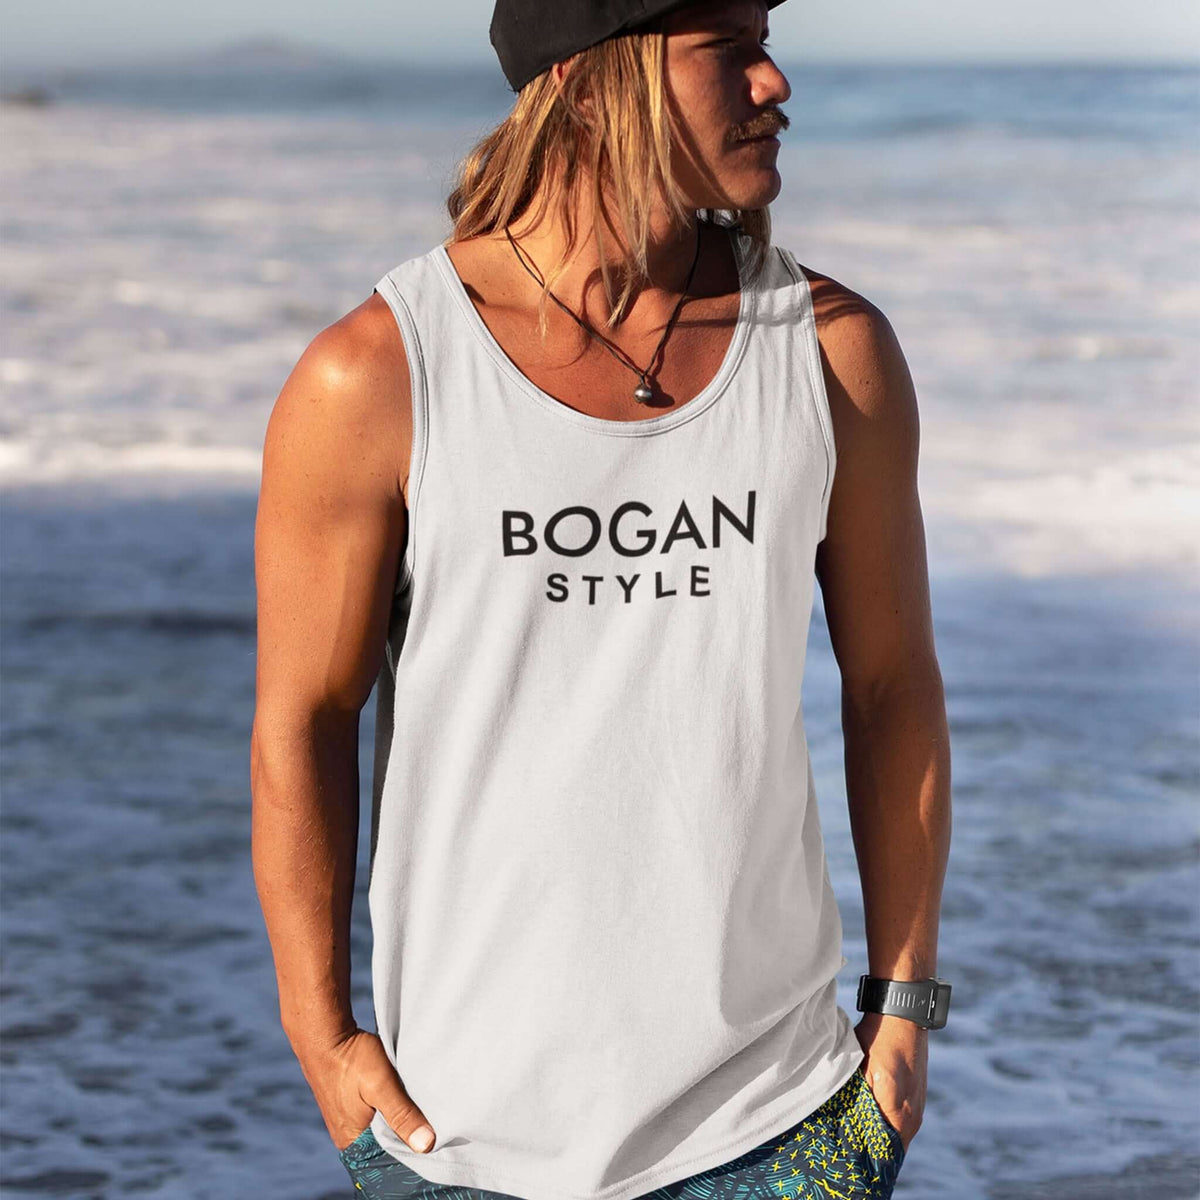 Surfer guy wears white tank top with Bogan Style printed on the front